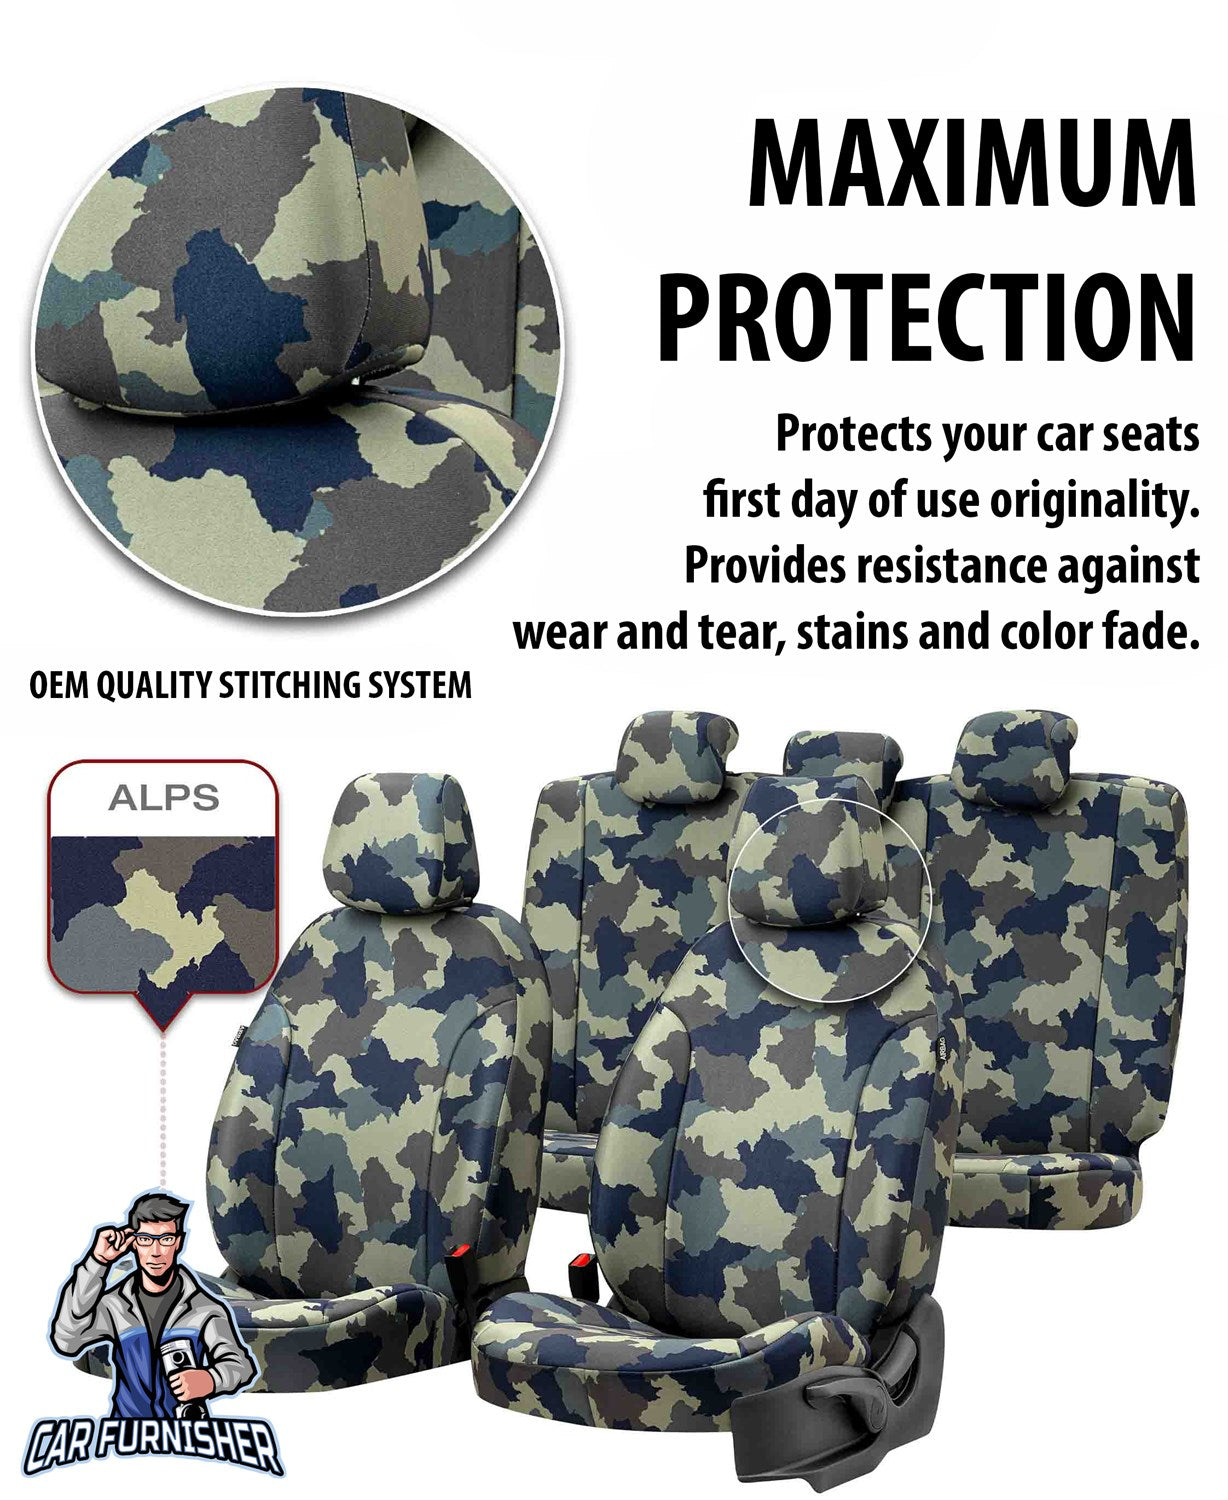 Toyota Avensis Seat Cover Camouflage Waterproof Design Everest Camo Waterproof Fabric